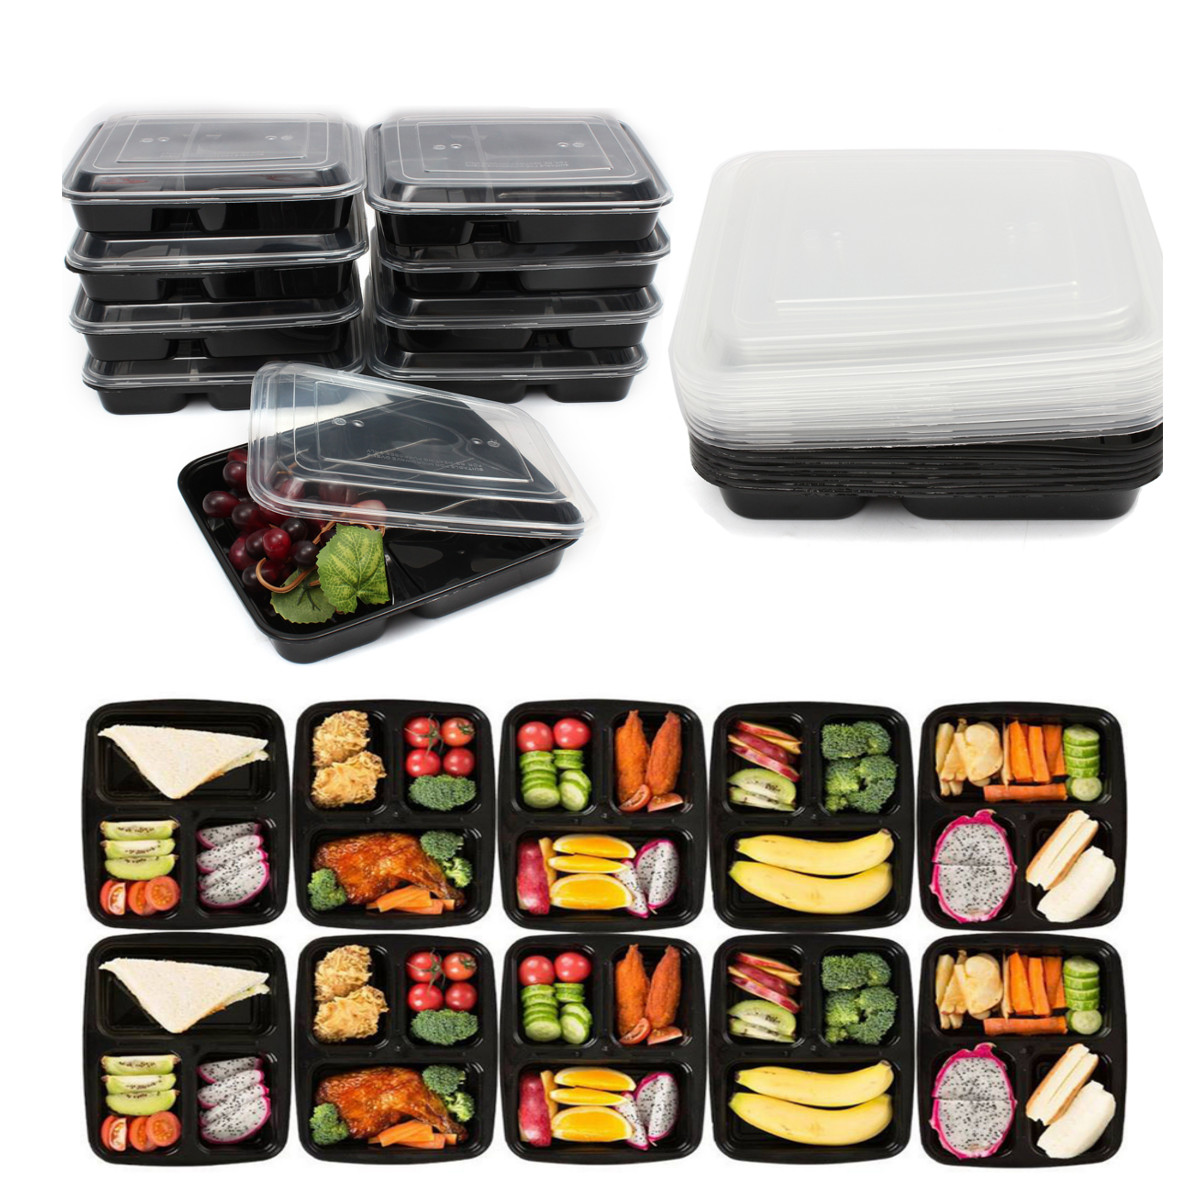 

10Pcs Meal Prep Lunch Box 3 Compartment Plastic Reusable Kitchen Microwavable Food Storage Container